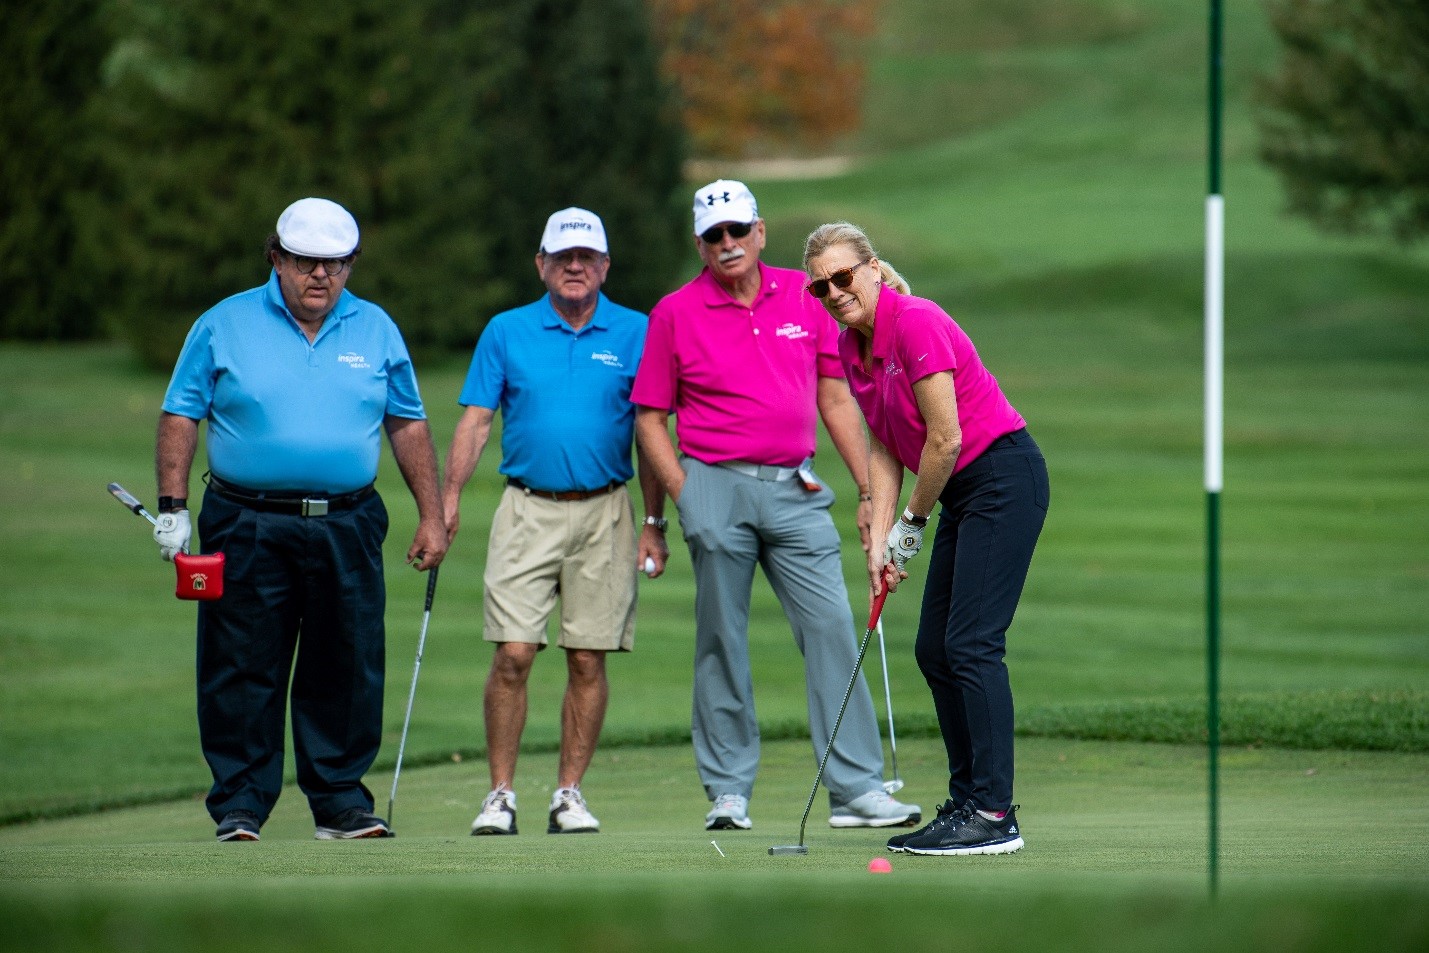 amy mansue putting on the green with a group of men behind her